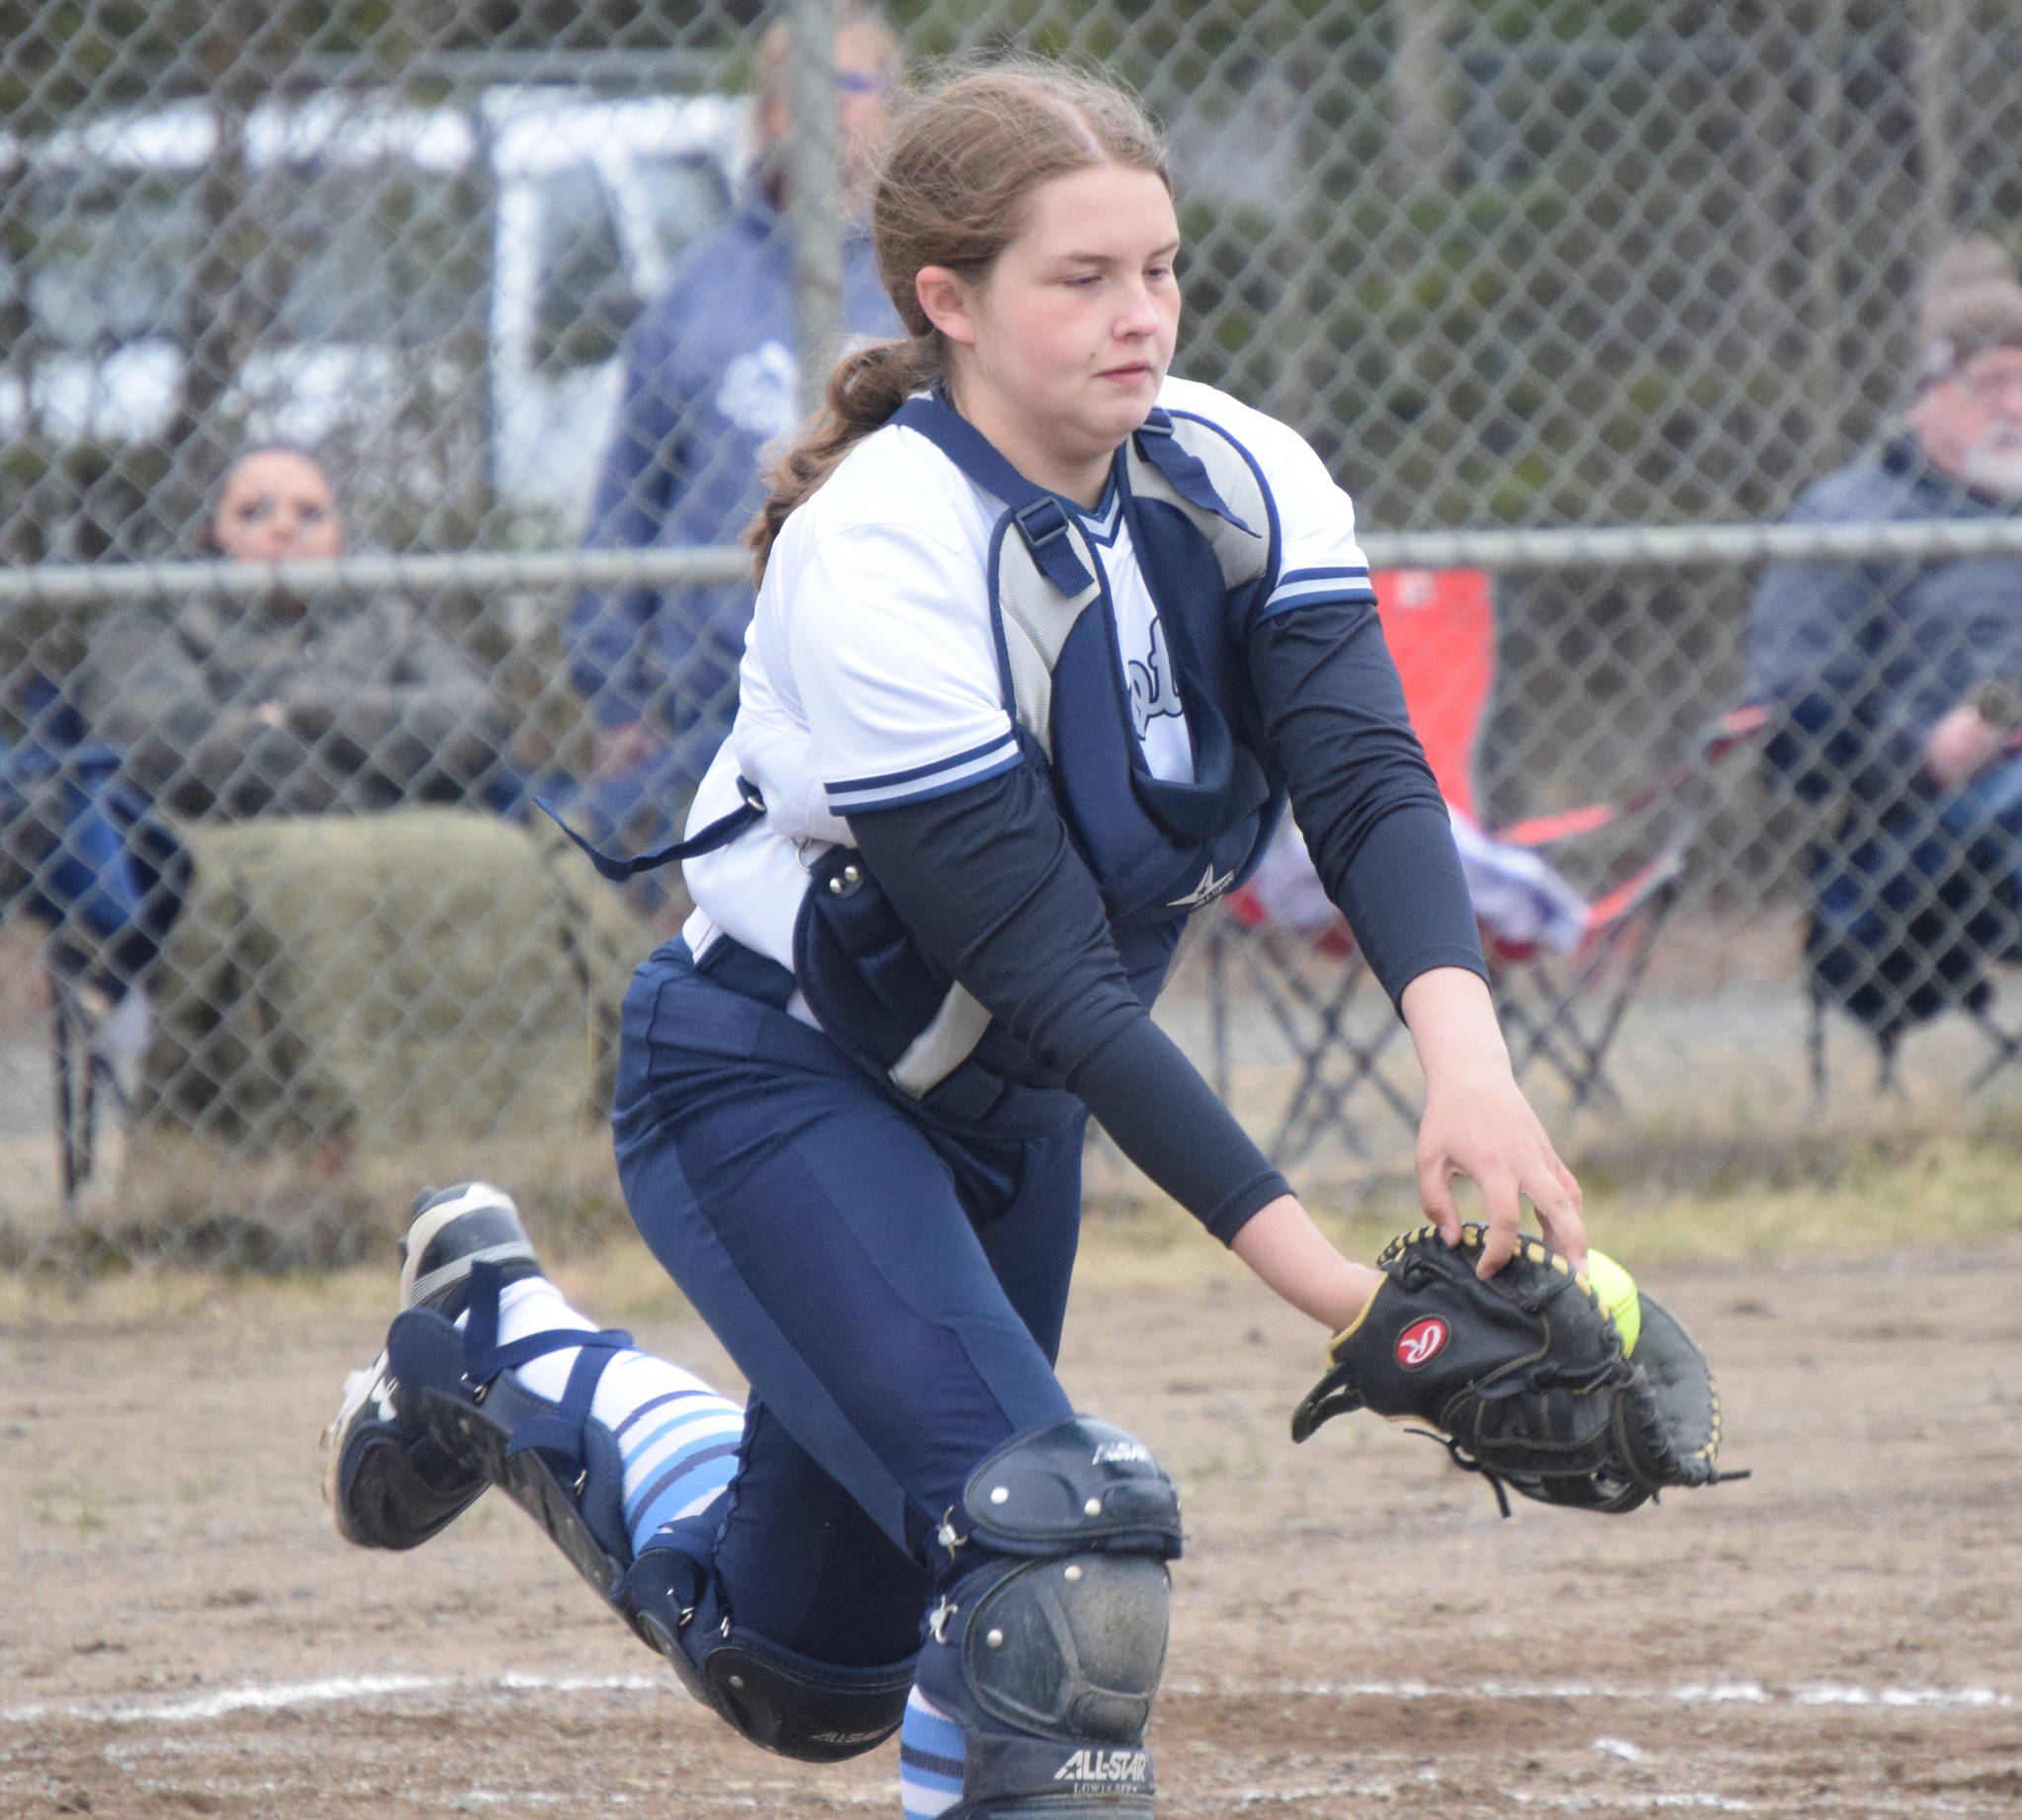 Soldotna catcher Bailey Conner stretches for a pop fly Thrusday, May 20, 2021, against Homer in Soldotna, Alaska. The ball popped out of the glove and was ruled a foul ball. (Photo by Jeff Helminiak/Peninsula Clarion)